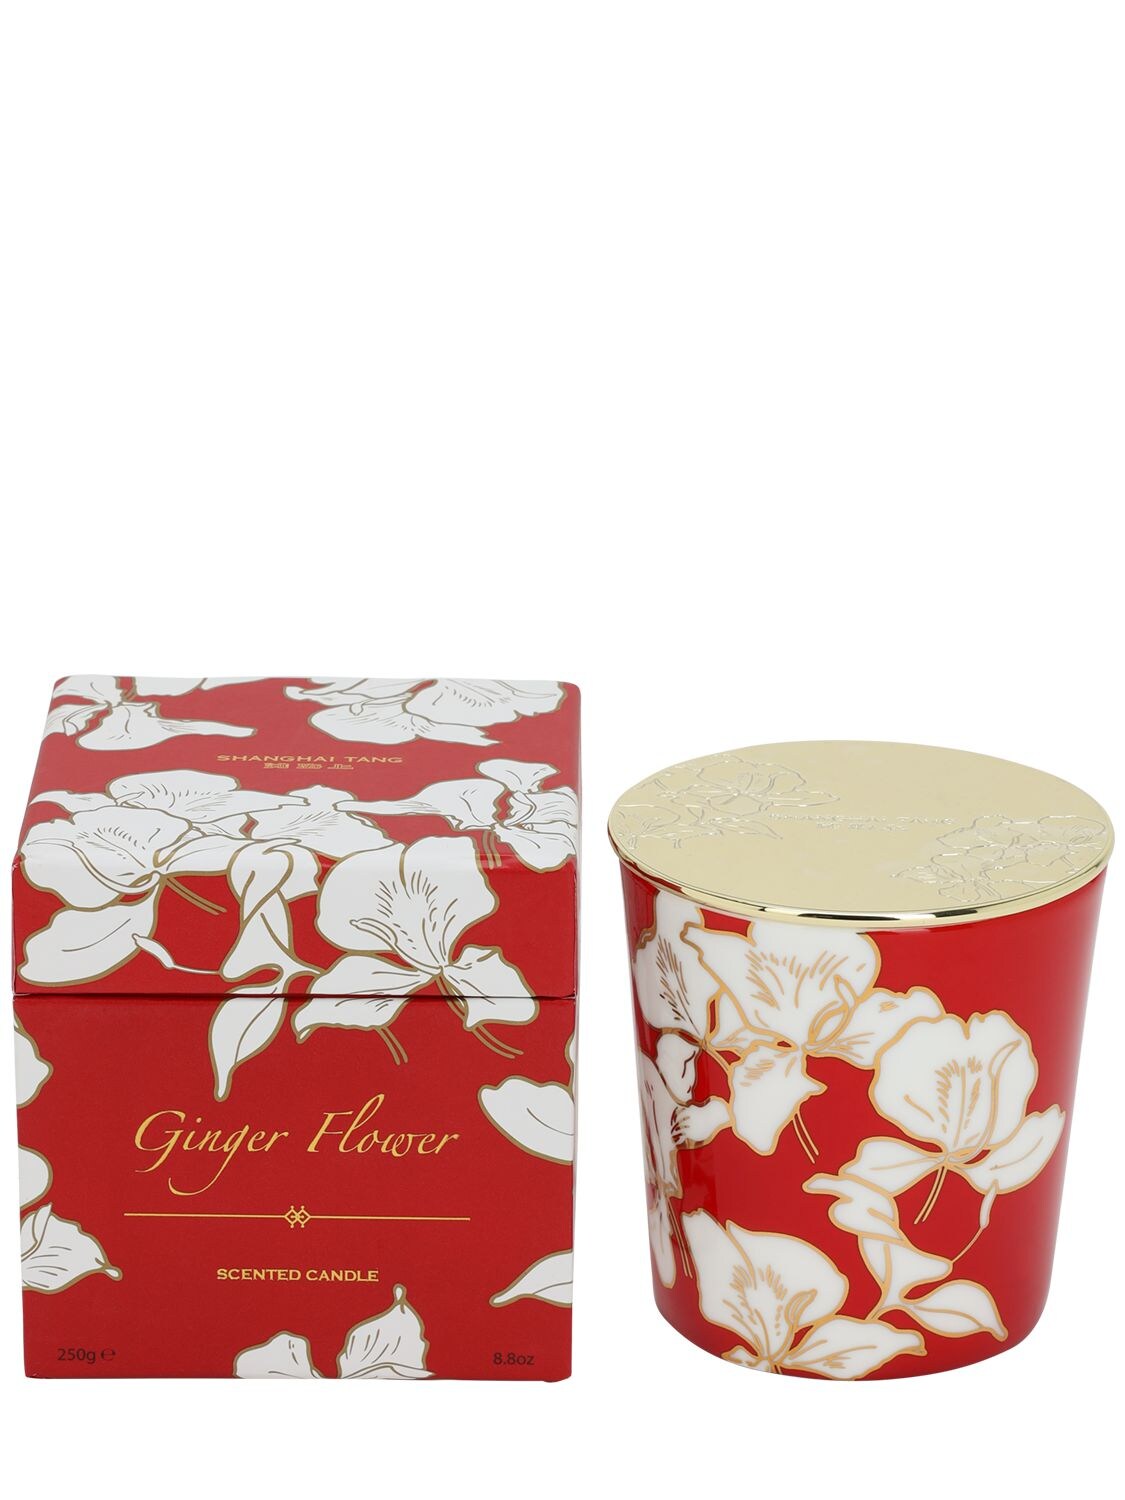 Shanghai Tang Ginger Flower Bone China Scented Candle In Red,white